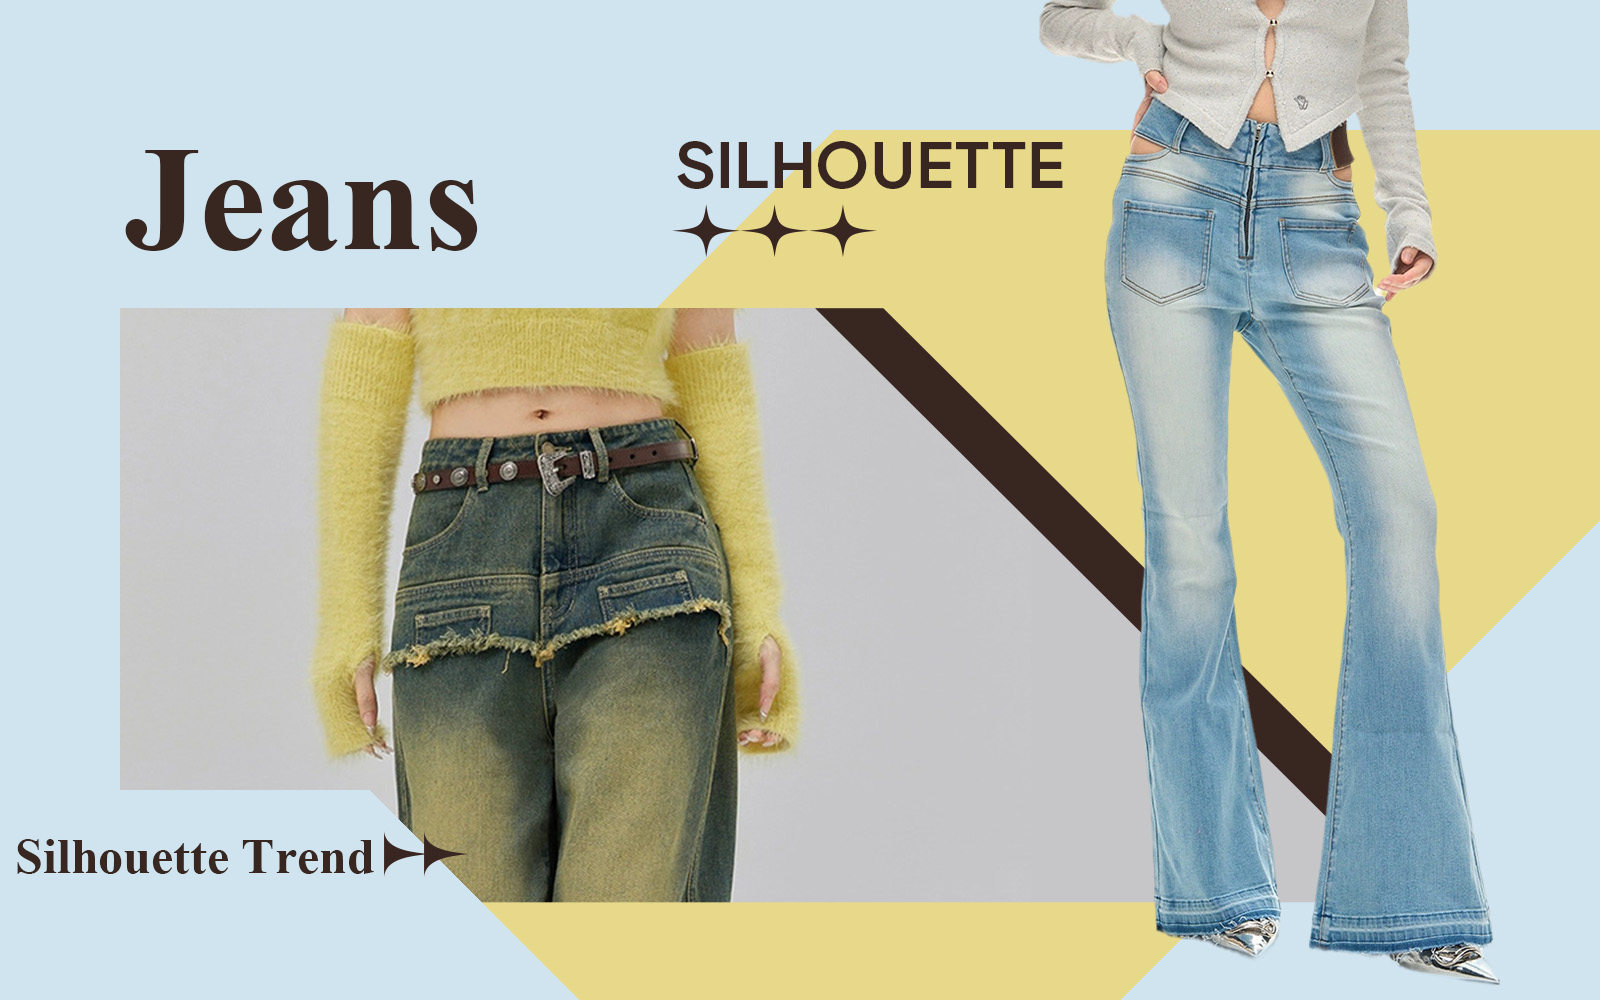 The Silhouette Trend for Jeans